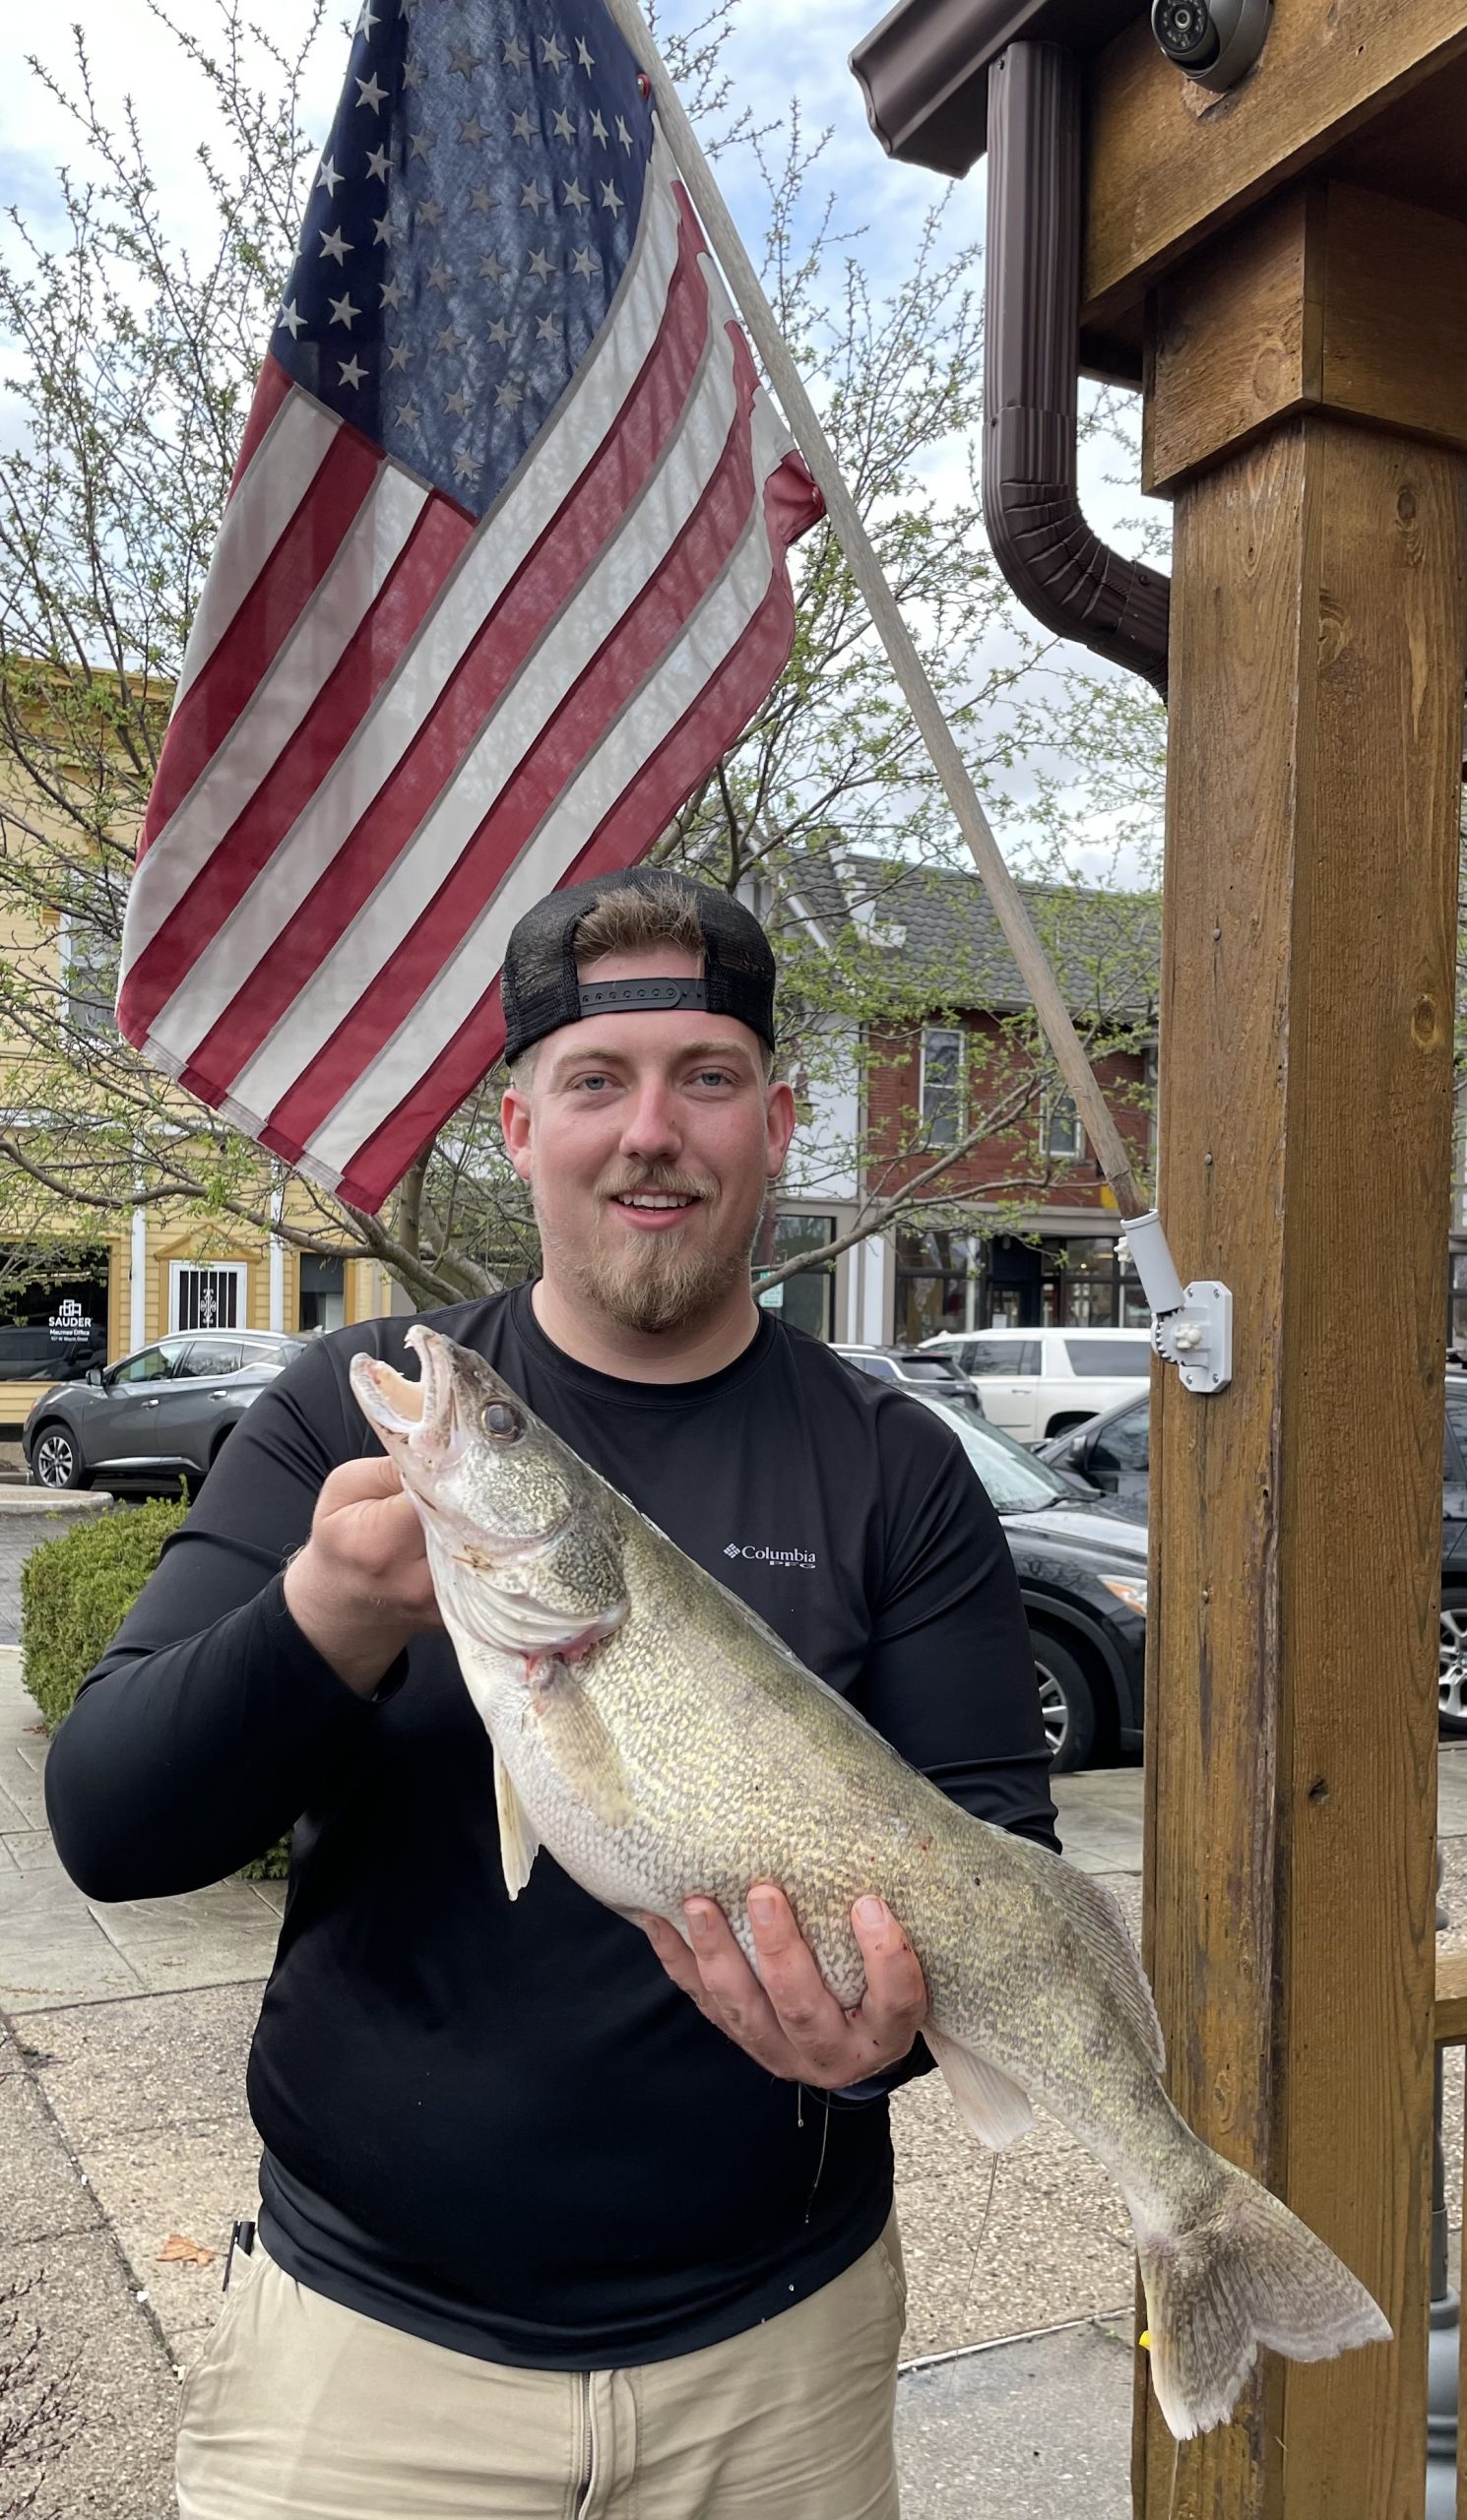 Maumee river report- April 14, 2022